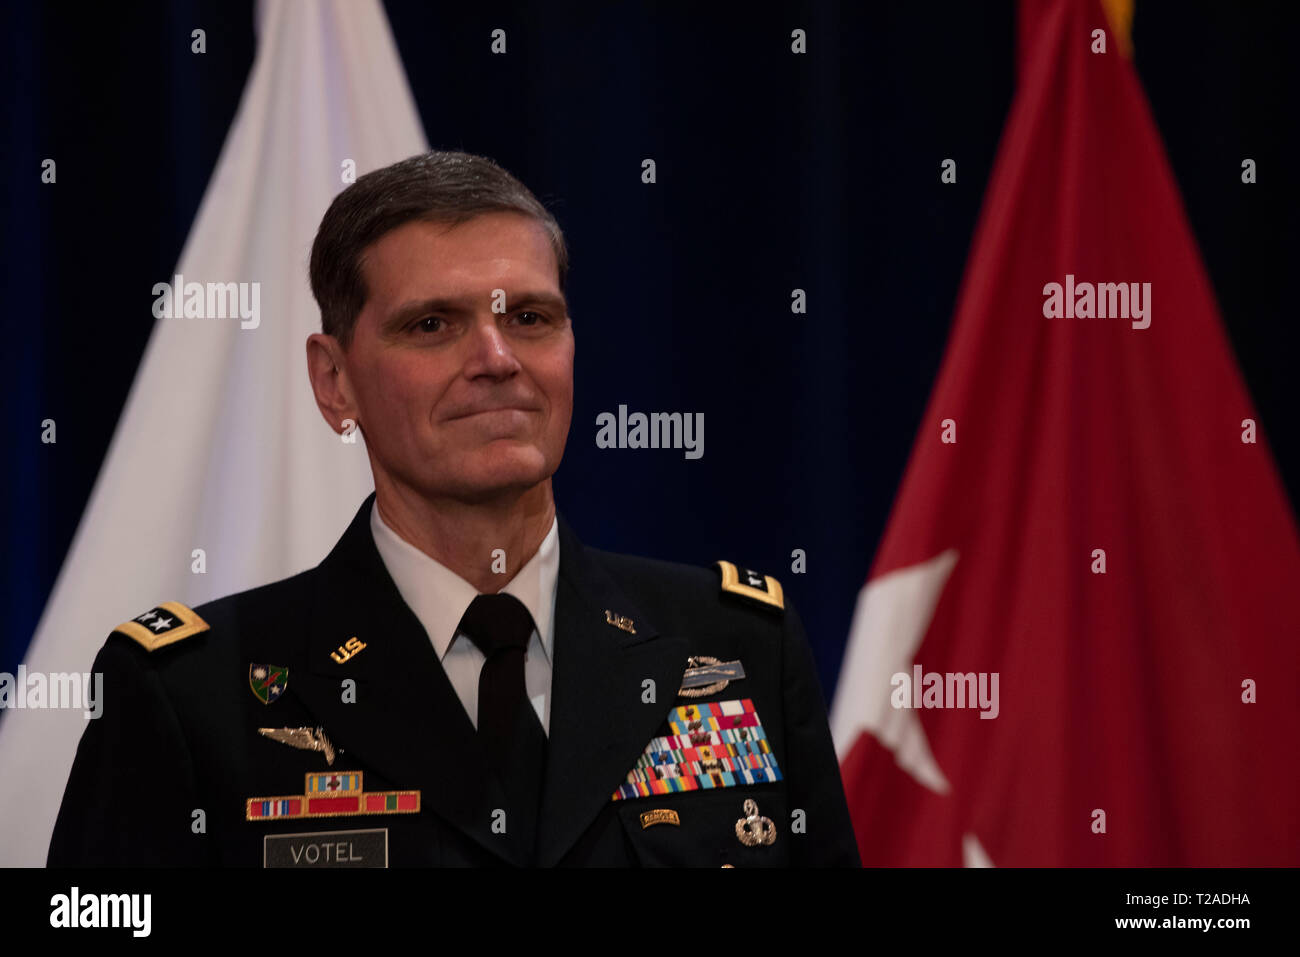 The outgoing commander of U.S. Central Command, General Joseph L. Votel, during his retirement ceremony at Macdill Air Force Base March 29, 2019 in Tampa, Florida. Votel retired after 39 years of military service. Stock Photo